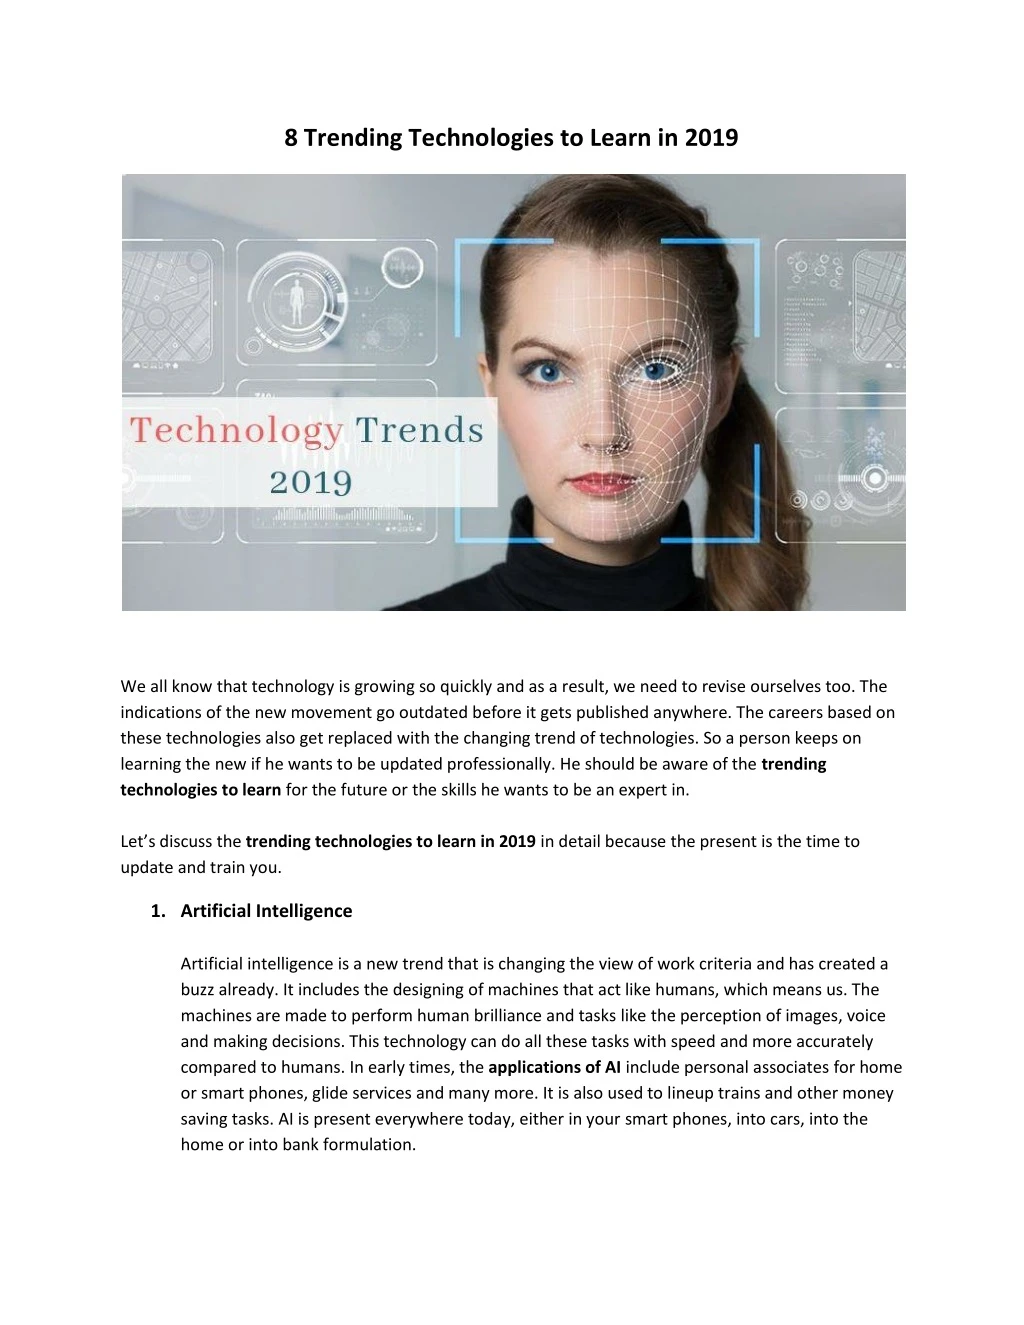 8 trending technologies to learn in 2019